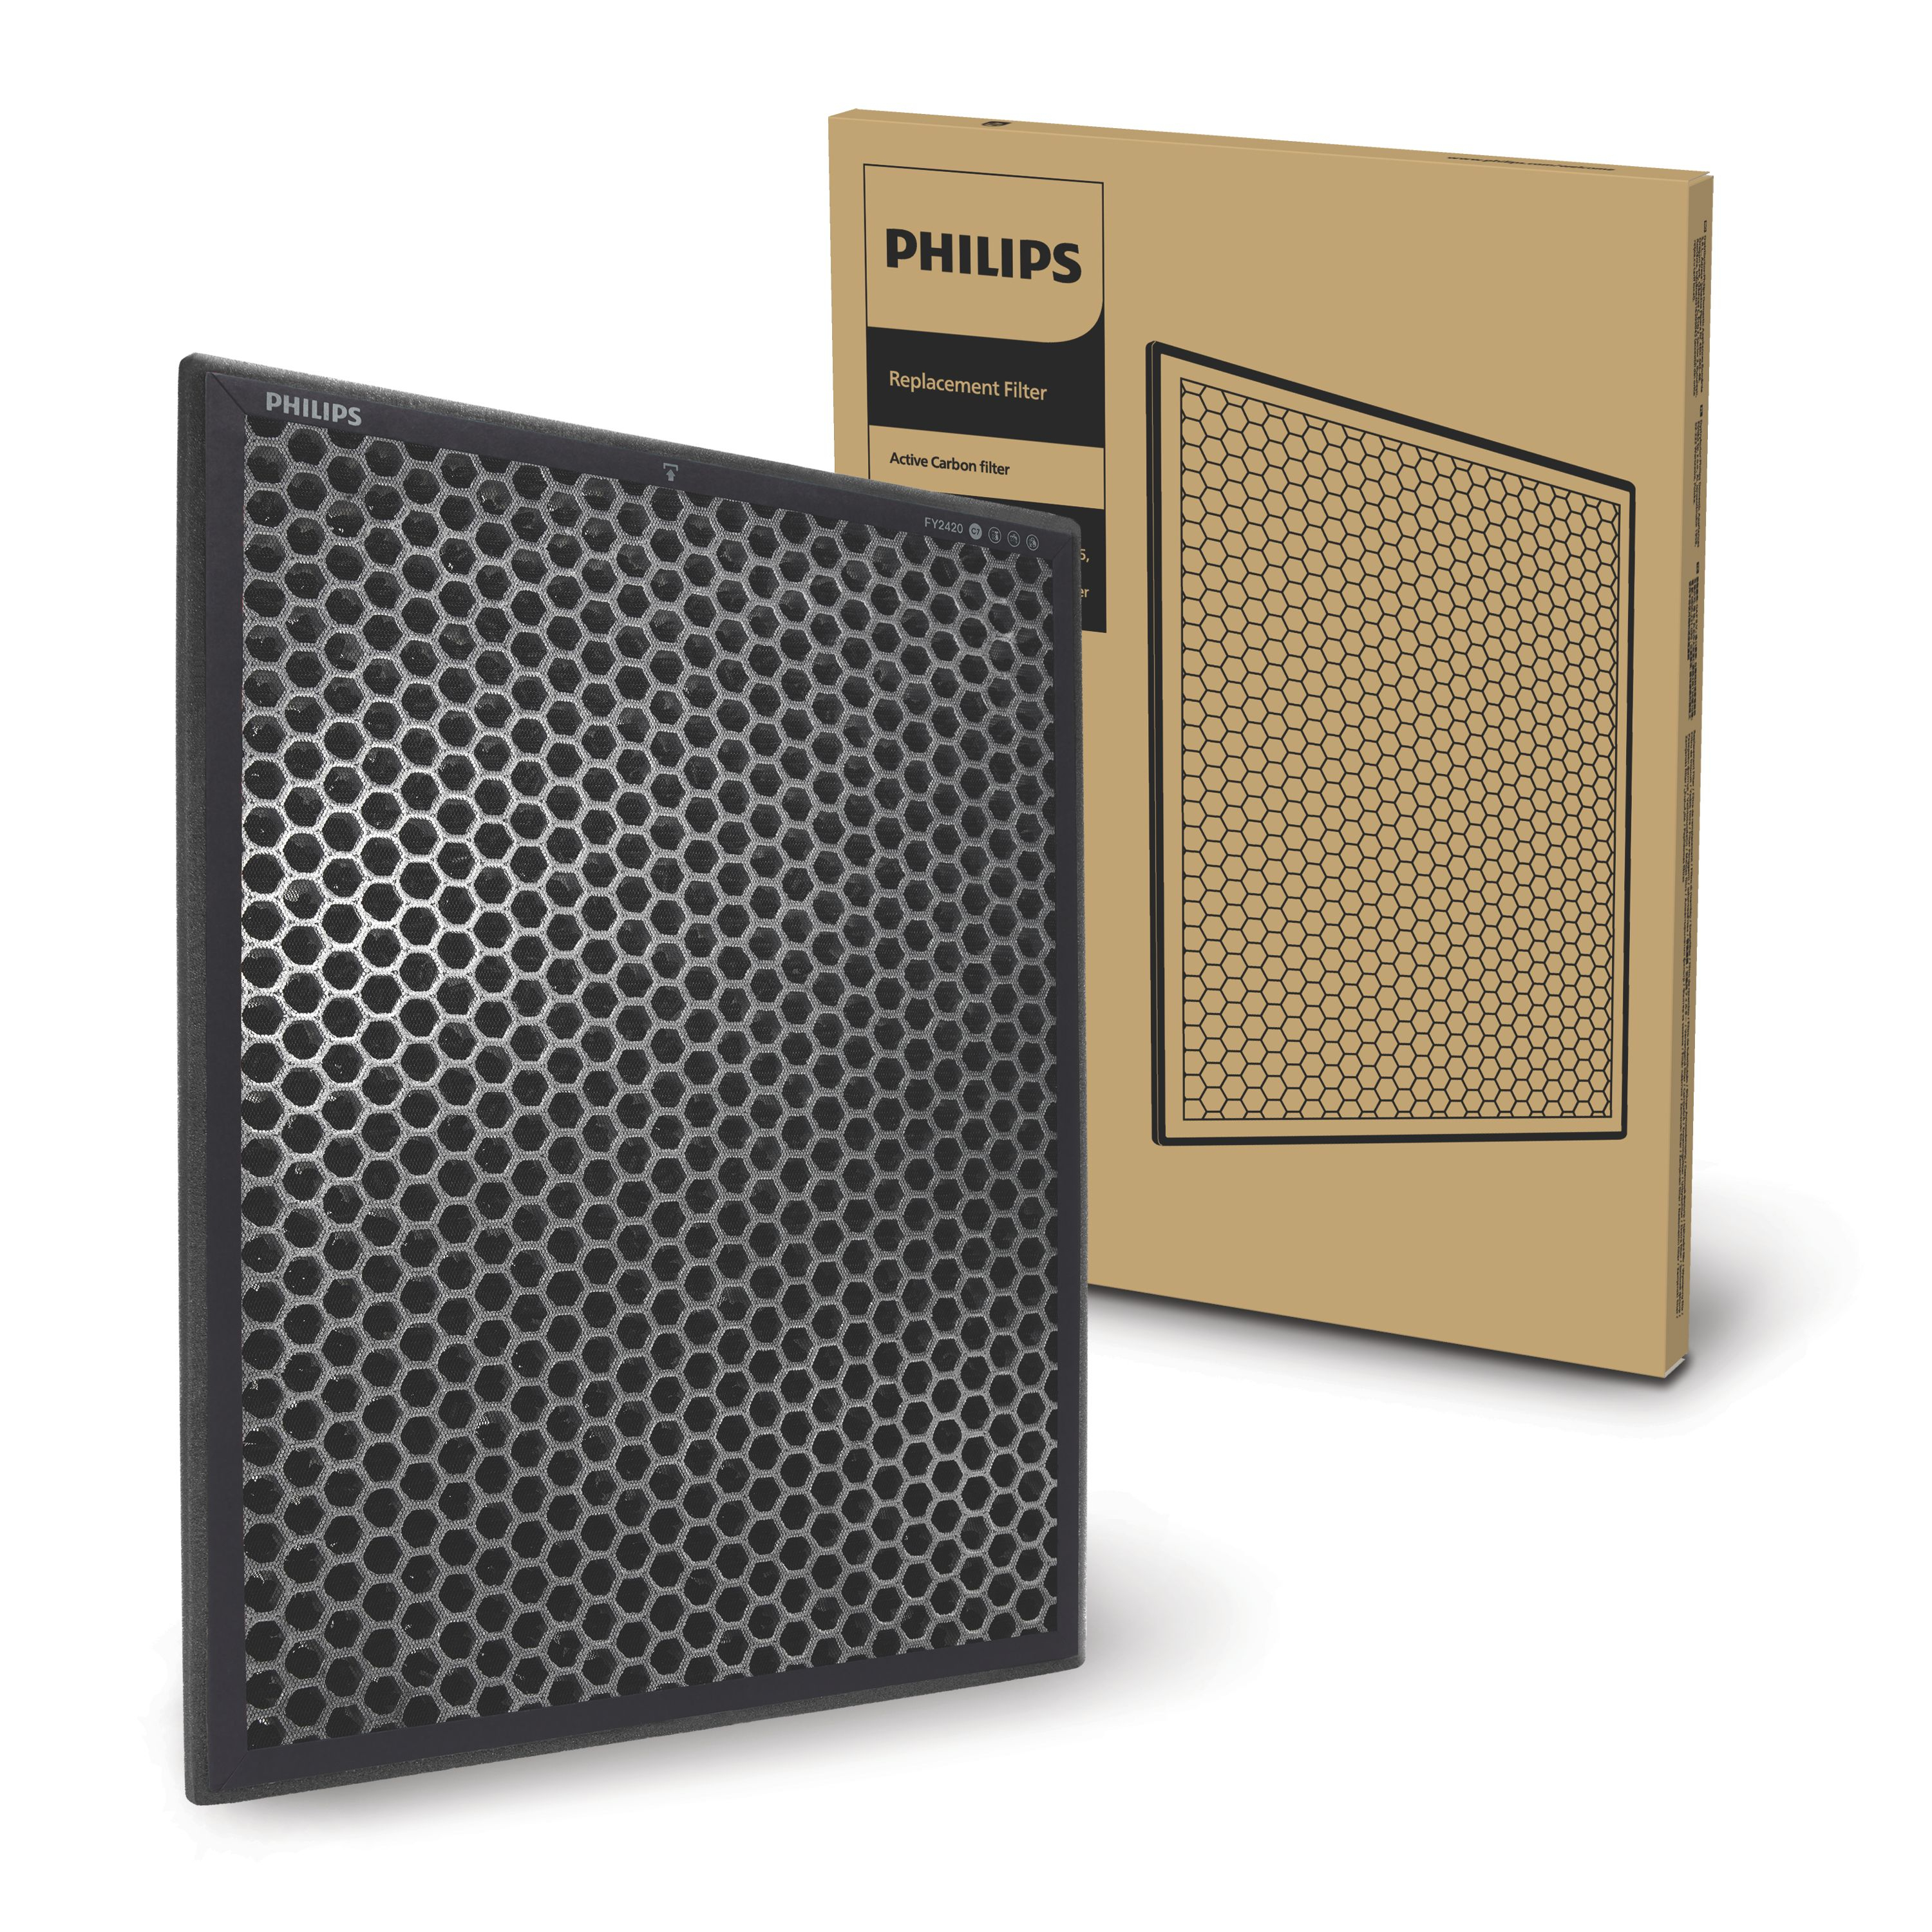 Philips Genuine replacement filter FY2420/30 Active Carbon-filter